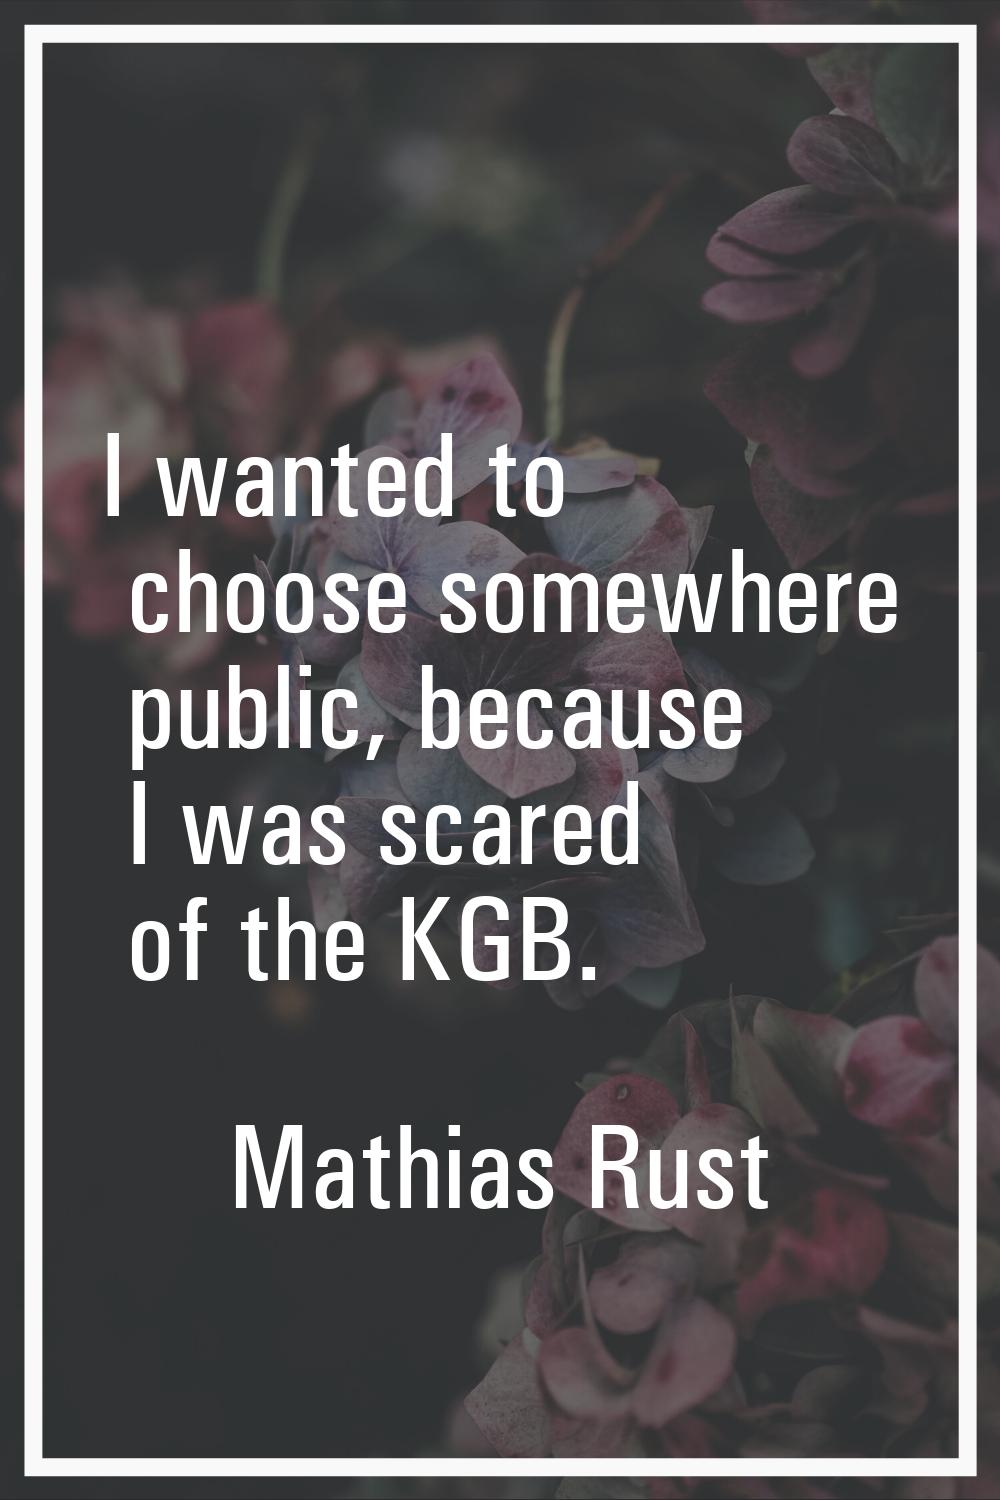 I wanted to choose somewhere public, because I was scared of the KGB.